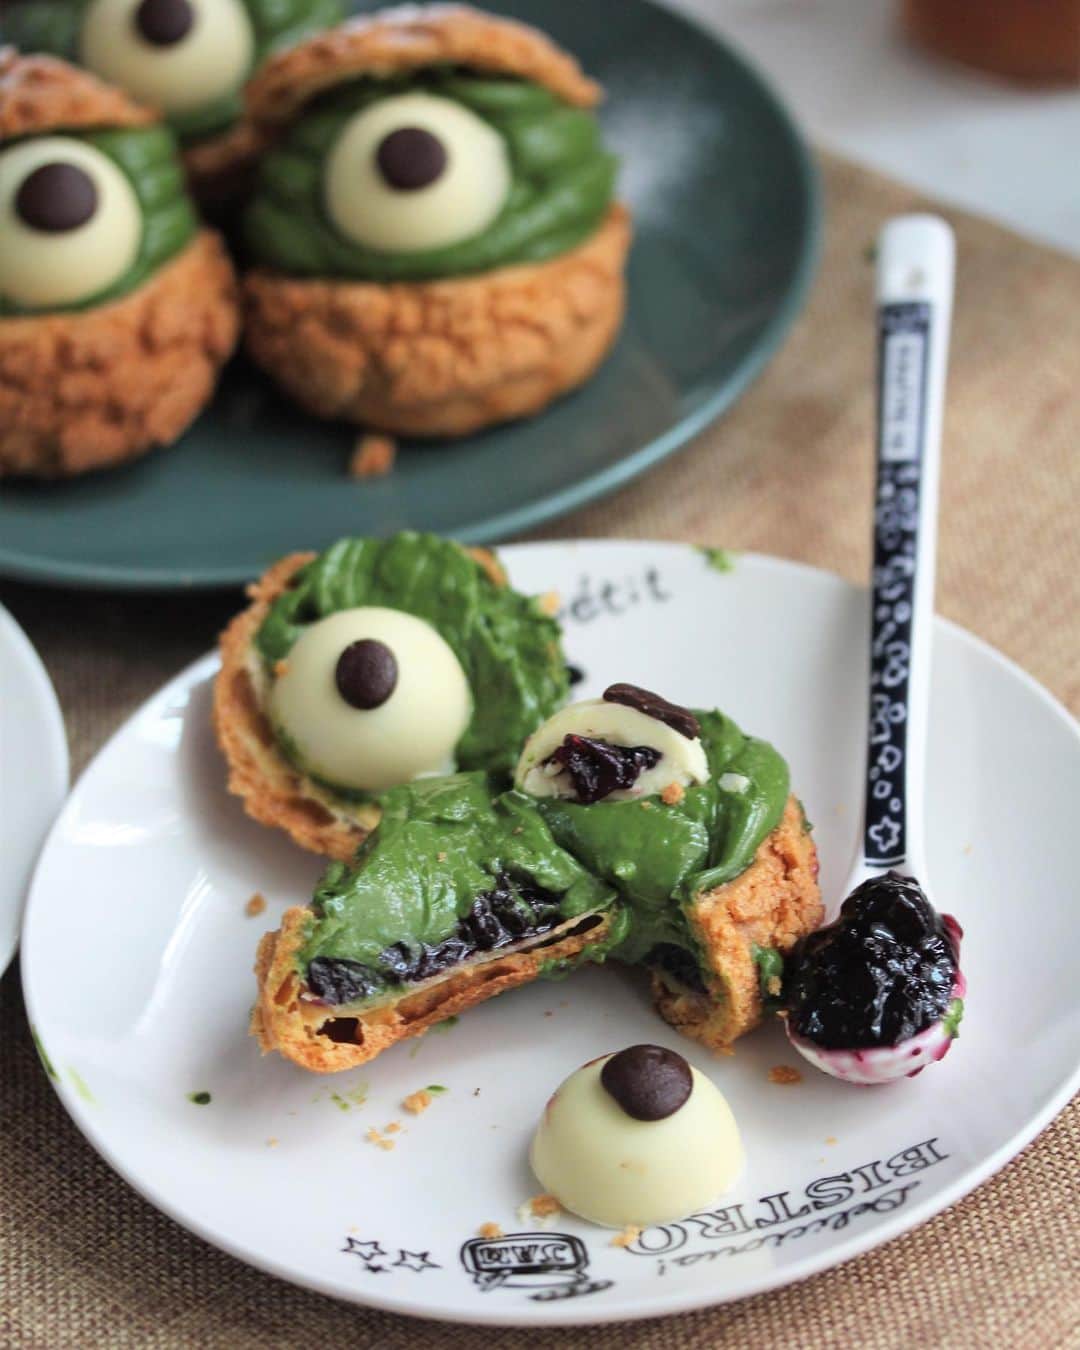 Li Tian の雑貨屋さんのインスタグラム写真 - (Li Tian の雑貨屋Instagram)「Boo Hoo Hoo! 👁 Happy Halloween! 🎃 🍵 Made these ultra rich matcha craquelin chouxs and filled them with some cranberry blueberry compote from @stdalfoursg at the base.   I also did the eyes and filled them with the jam compote 👻 If you are one who loves to enjoy baking or cooking, don’t miss the chance to win a Le Creuset set worth $1,600 😱 Find out more info below and on @Stdalfoursg IG   HOW TO PARTICIPATE Step One: Create your creative bakes/cooks using St. Dalfour fruit spread Step Two: Post your creation on your Instagram profile and tag @stdalfoursg in your picture! (Profile must be set to public) from 2 Nov till 23 Nov  Step Three: Get your friends to vote for your entry on St. Dalfour Singapore Facebook page from 24 Nov onwards!   #StDalfour #StDalfourSG  • • #dairycreamkitchen #singapore #desserts #igersjp #yummy #love #sgfood #foodporn #igsg #ケーキ  #instafood #beautifulcuisines #sgbakes #bonappetit #cafe #cakes #bake #sgcakes #スイーツ #feedfeed #pastry #sgcafe #cake #homebaker #stayhomesg #homebake #matcha #抹茶」10月31日 14時06分 - dairyandcream